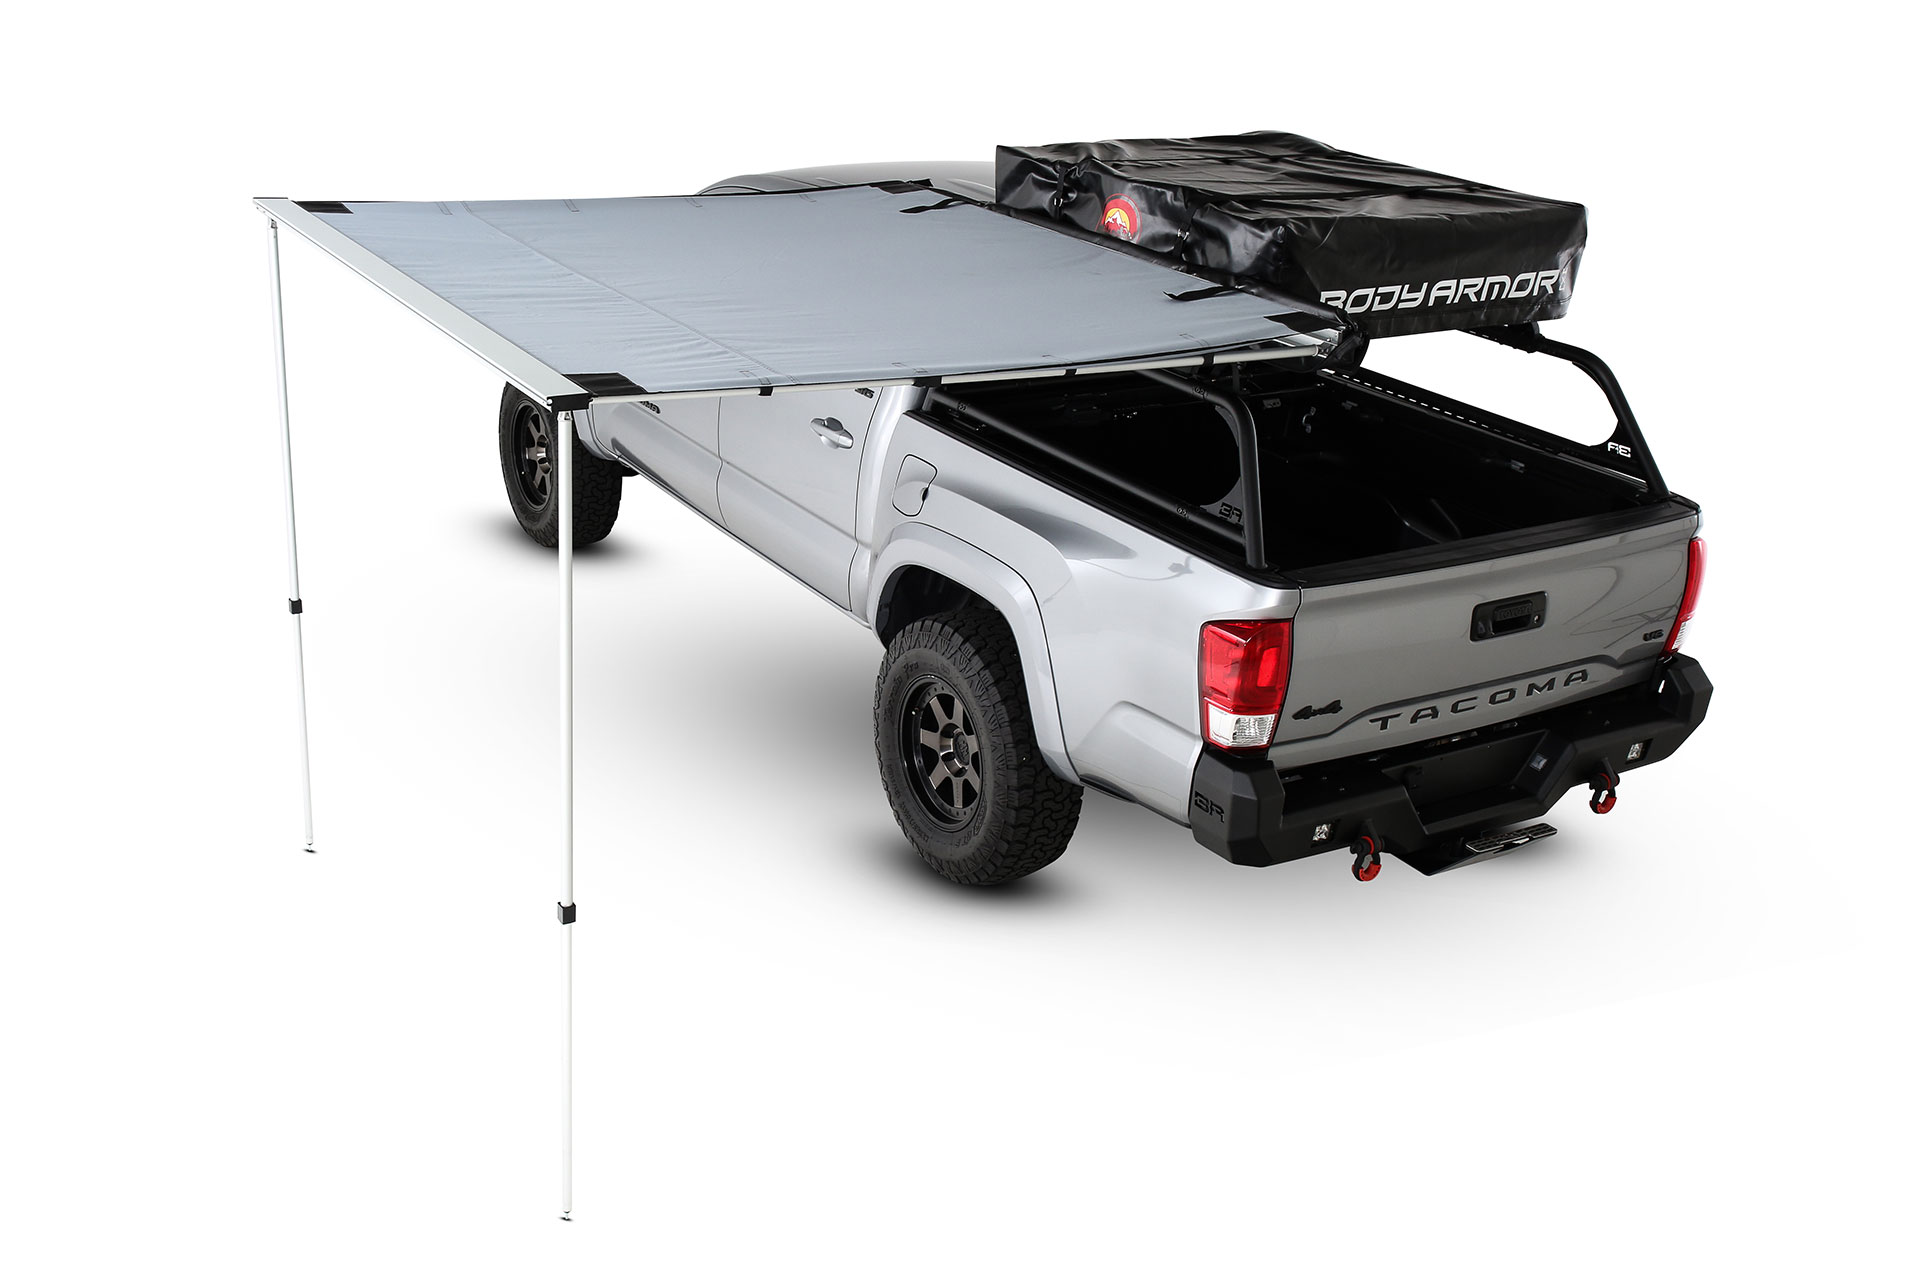 Body Armor 6.5' Pike Awning - Click Image to Close